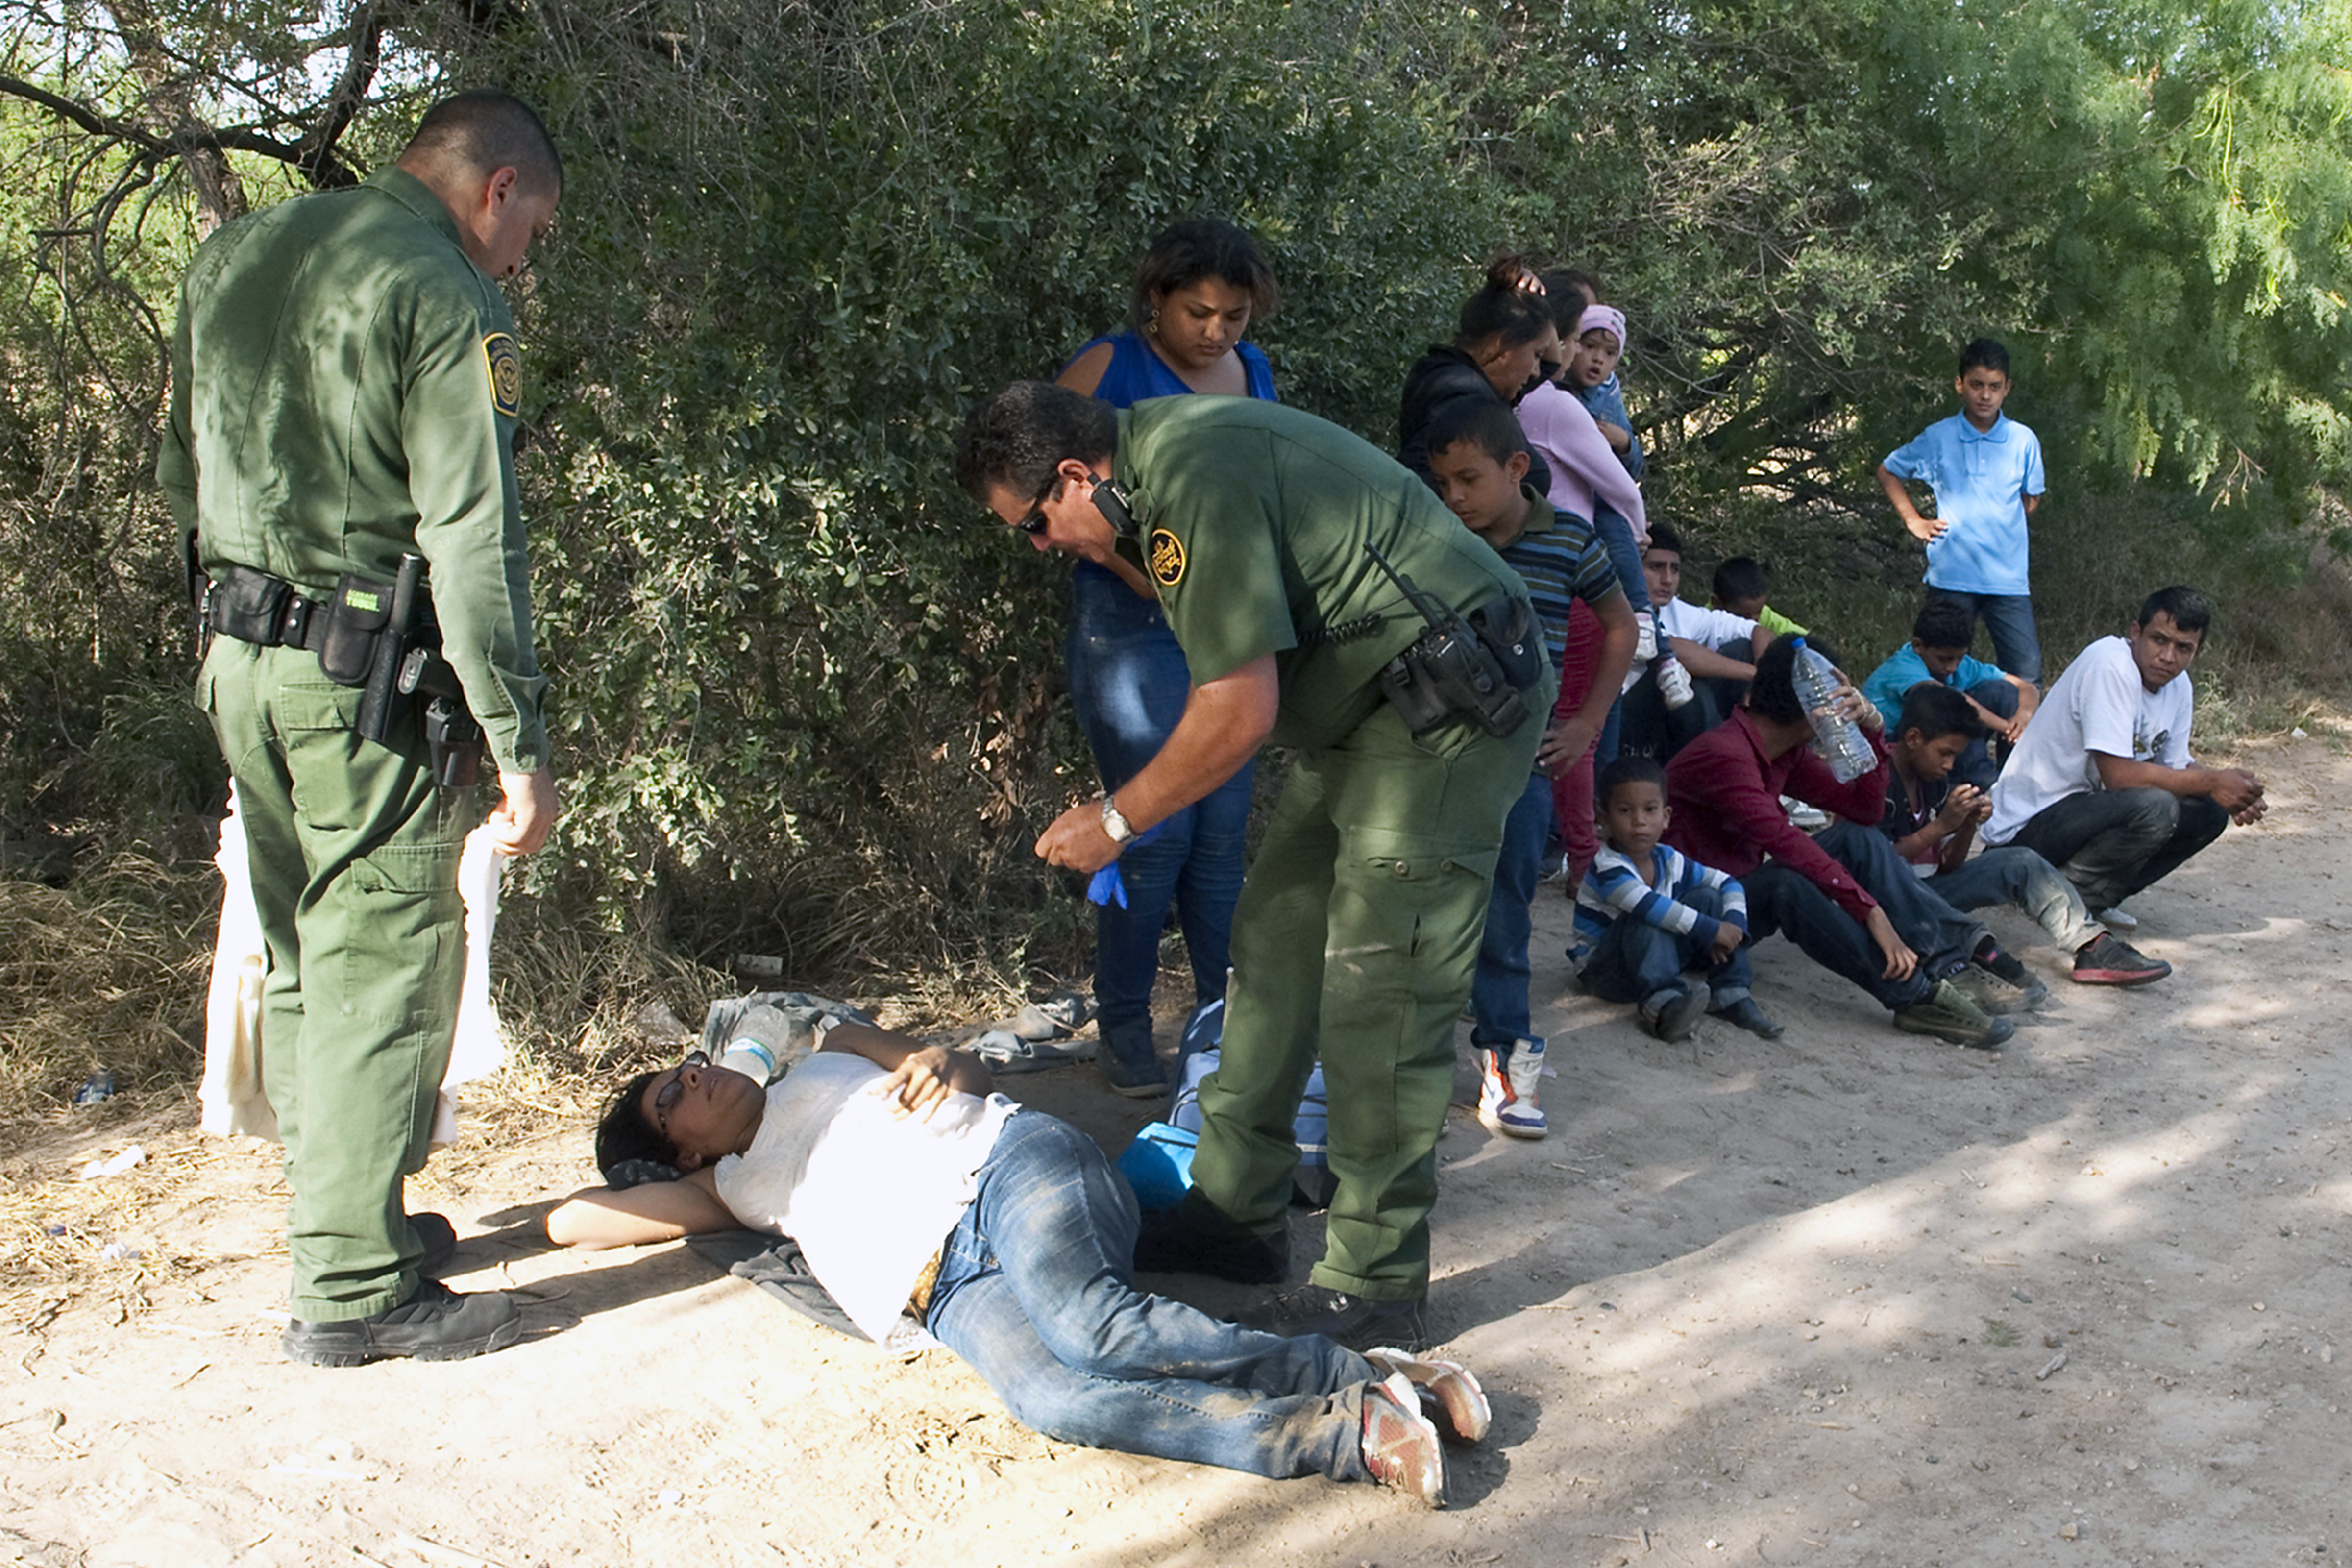 Border Patrol agents provide first aid to woman in distress at southern U.S. border. (Photo by Barry Bahler)